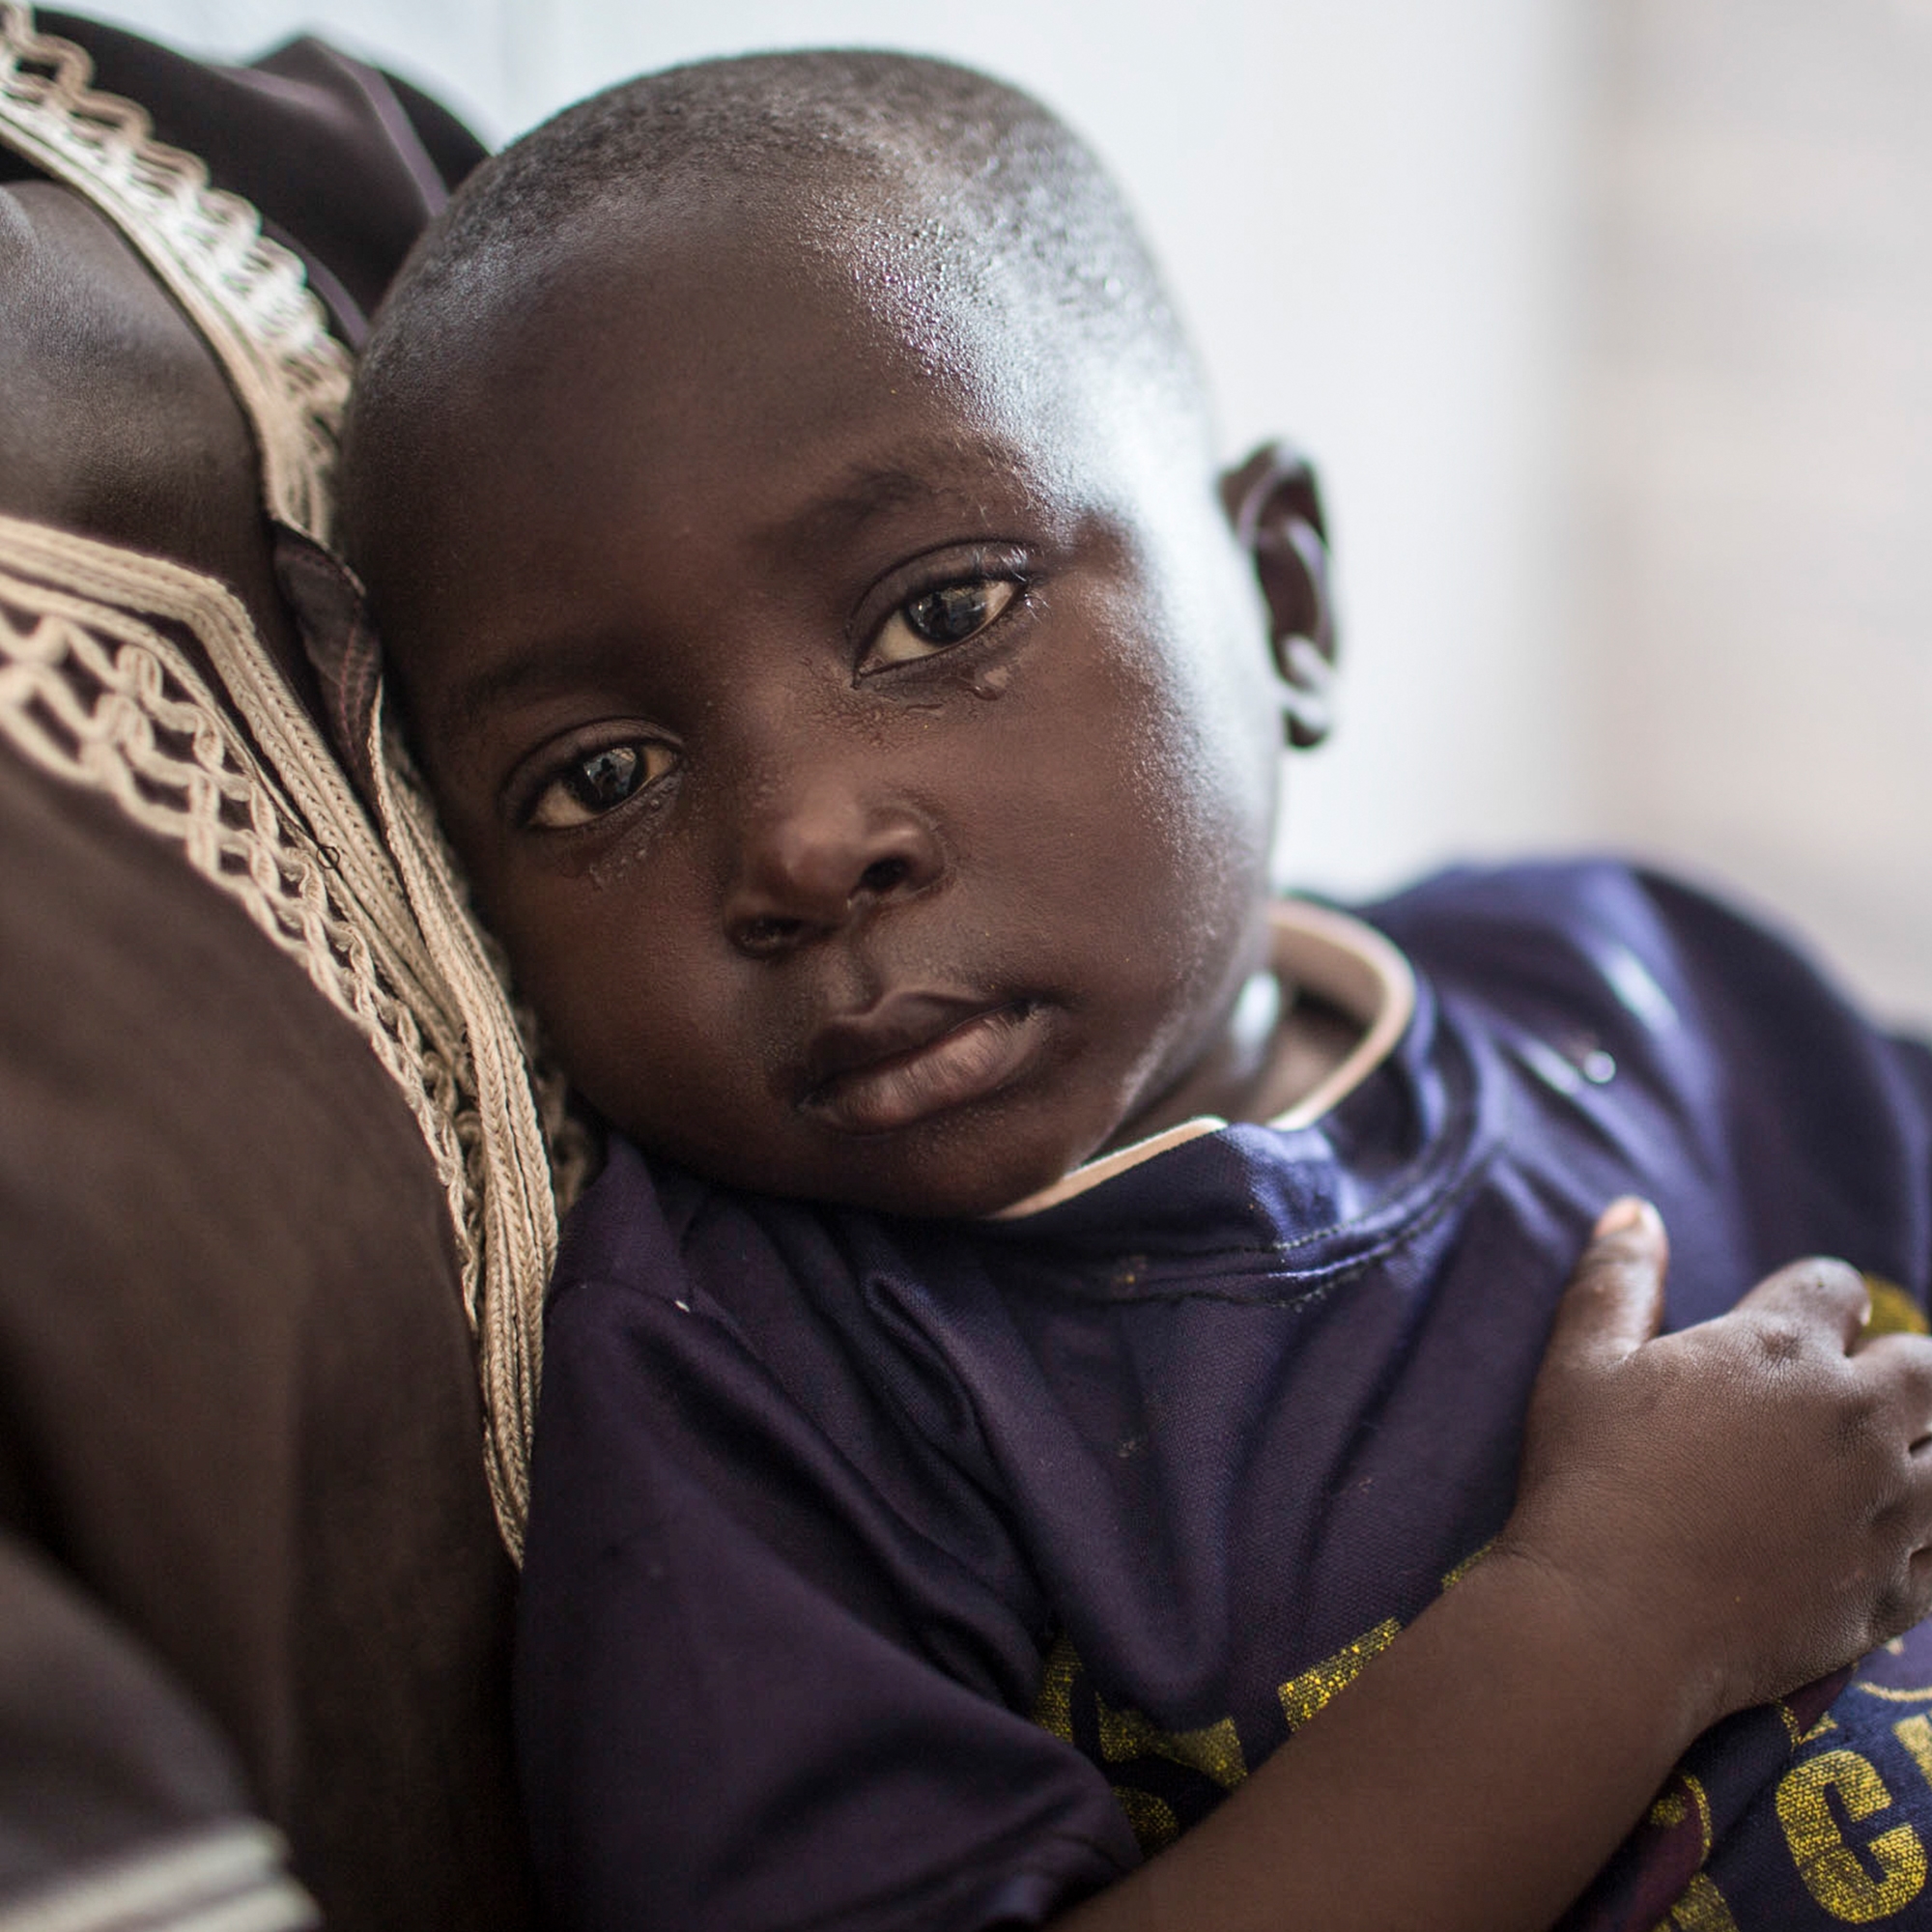 Tiny Joseph, in the arms of his mother, Viola. After fleeing South Sudan, Joseph had chest pain, a fever and was coughing. His mother brought him to a Save the Children Emergency Health Unit where he was treated with lifesaving antibiotics. Photo credit: Guilhem Alandry/Save the Children, March 2017. 